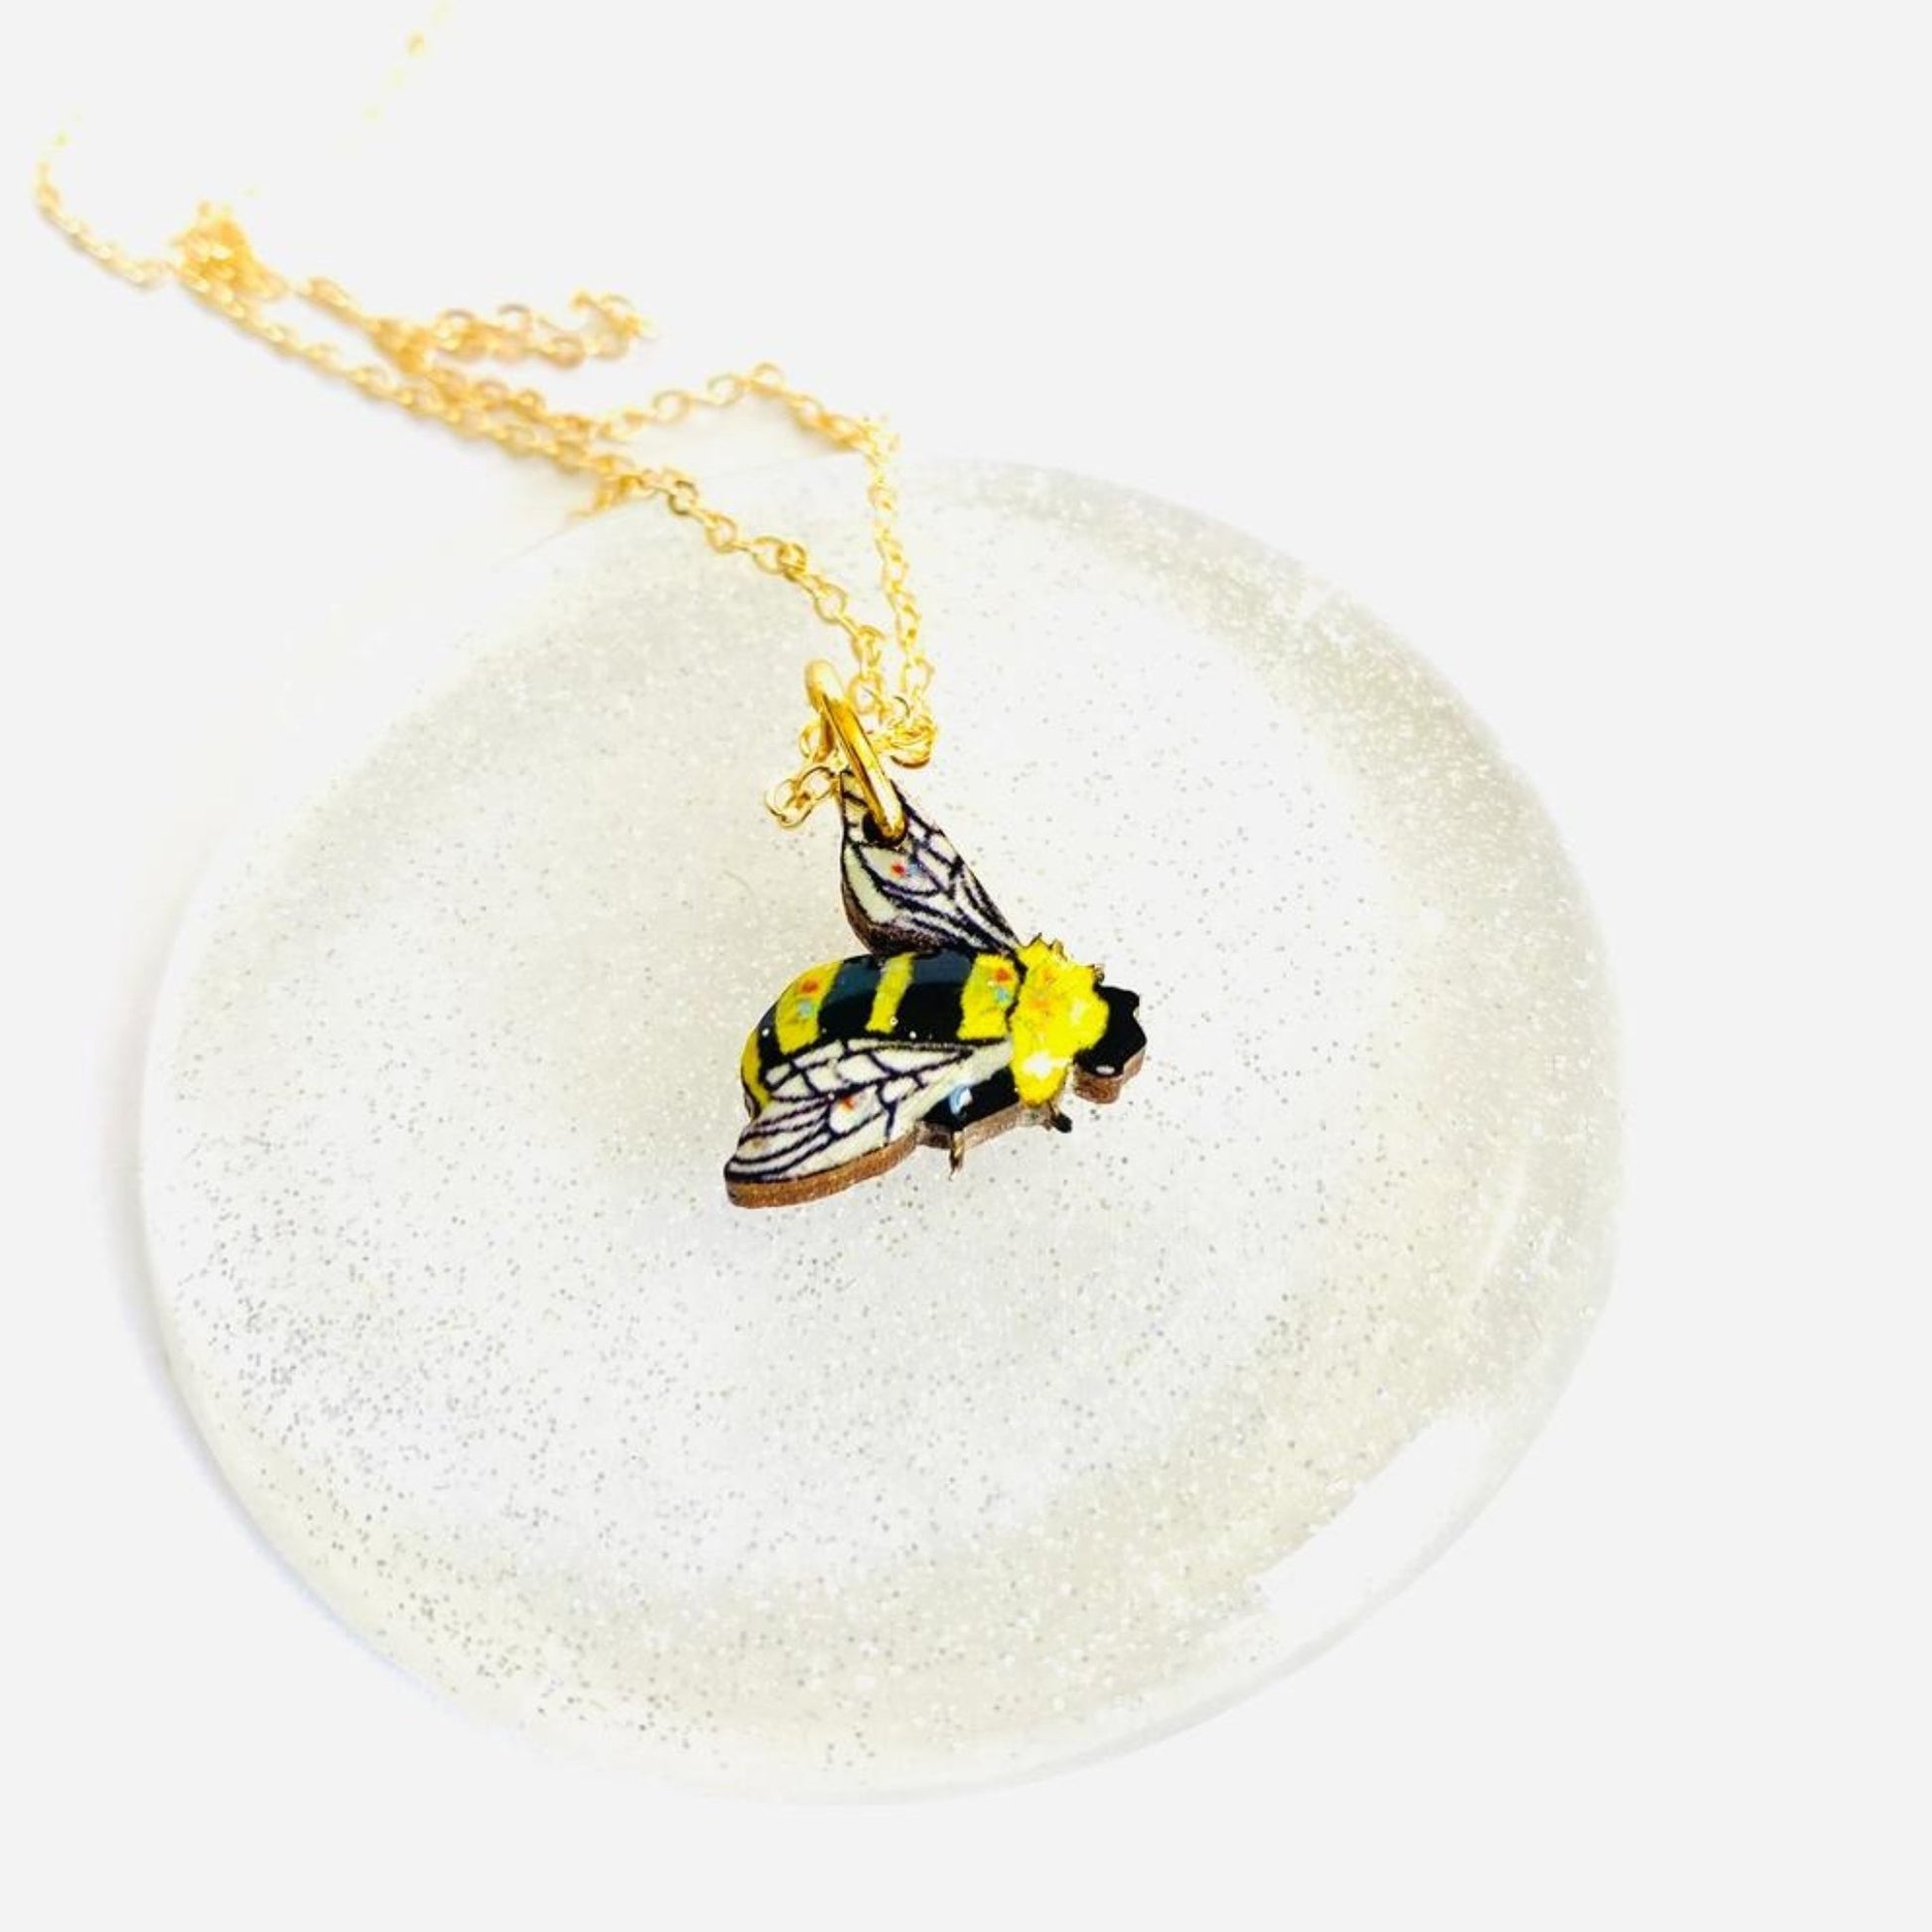 Pretty Bee Necklace - The Little Jewellery Company